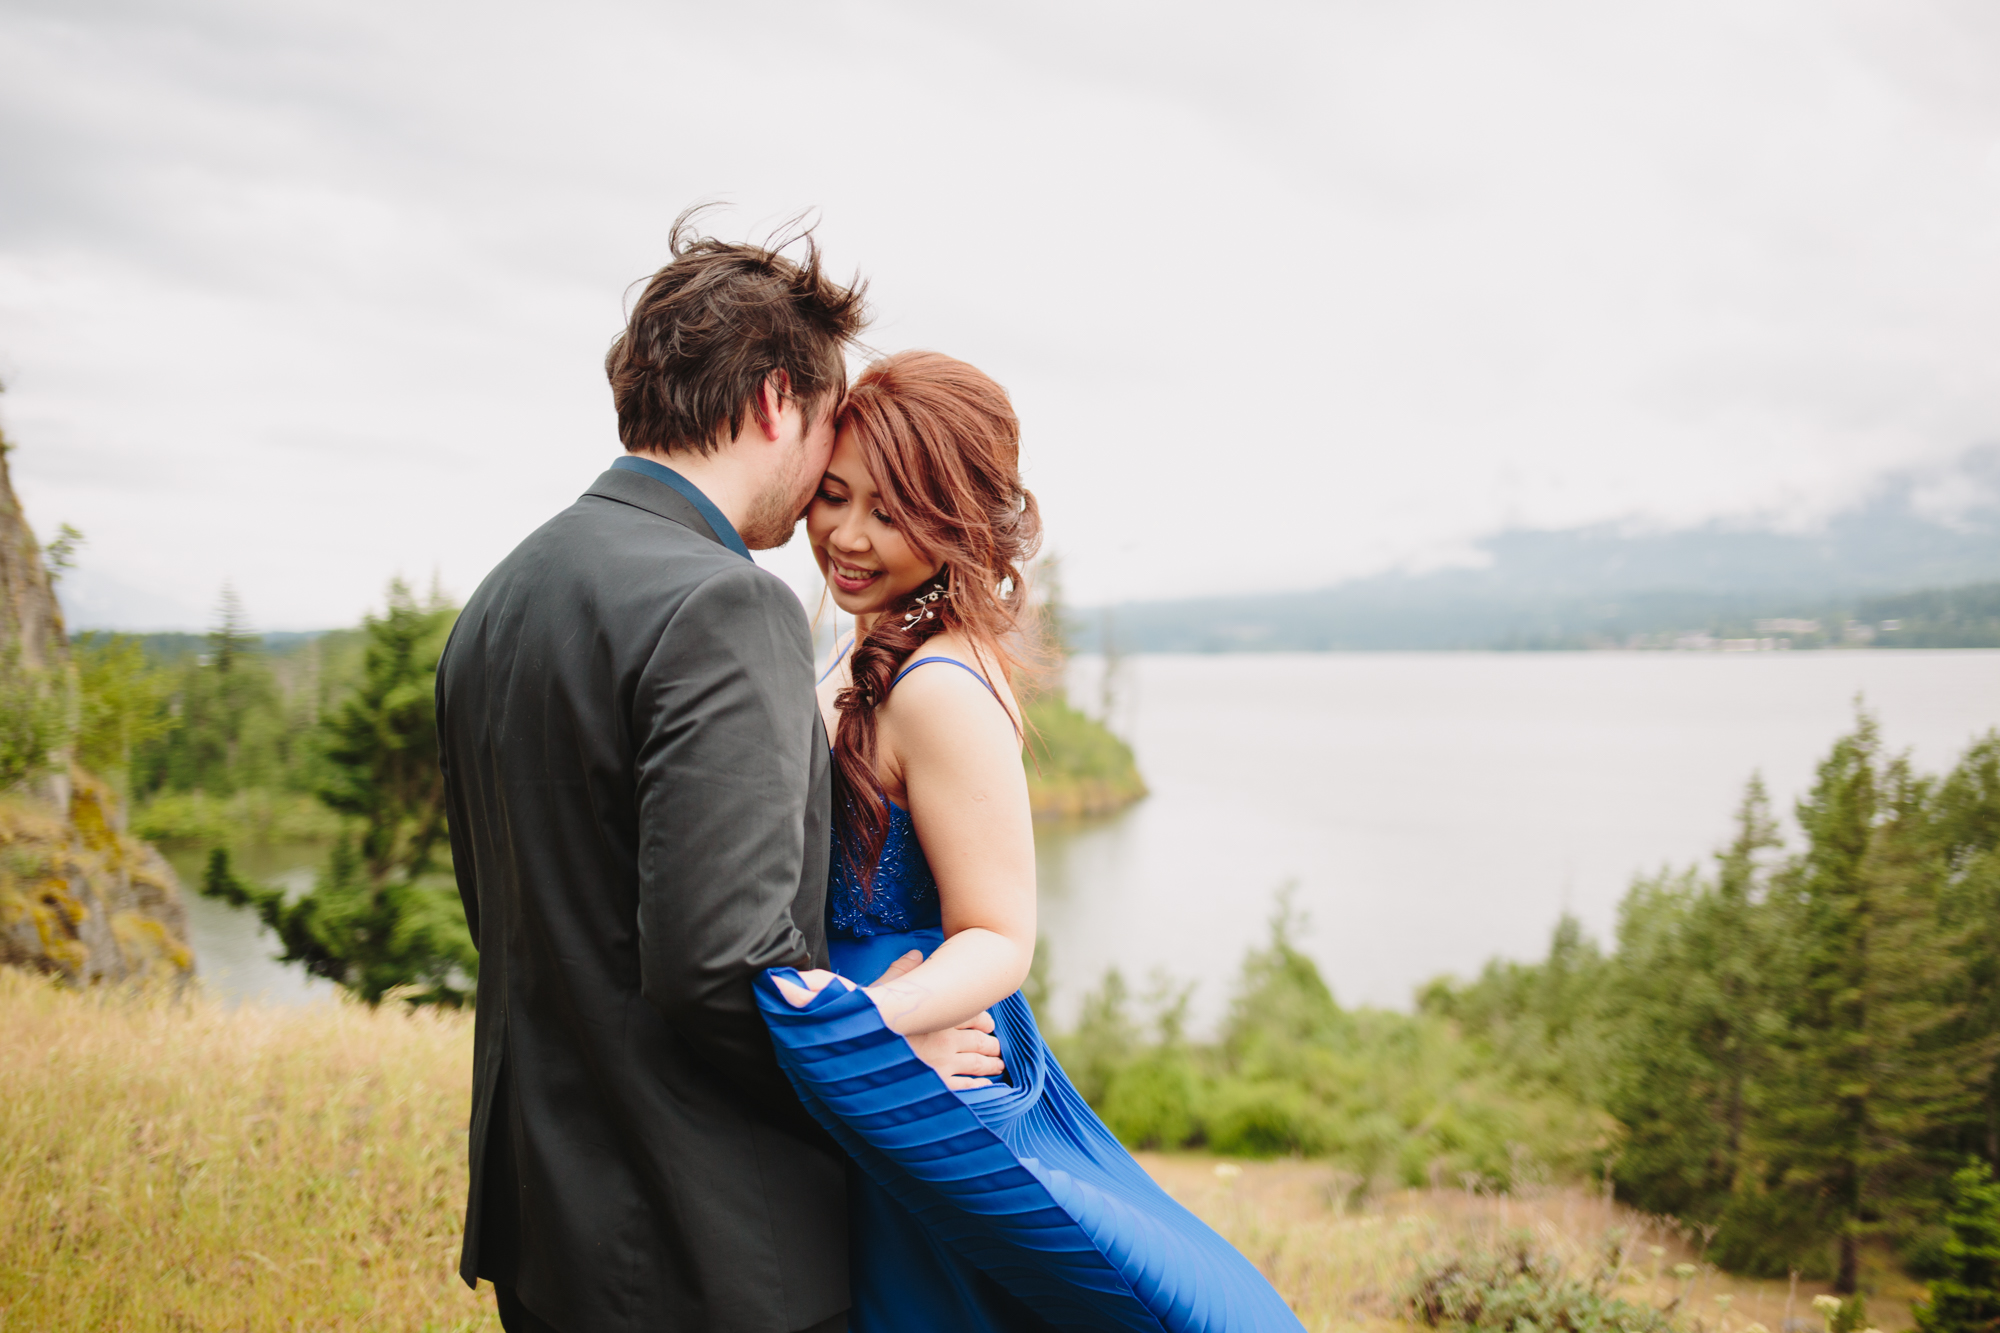 Couple Photoshoot in Windy Columbia River Gorge